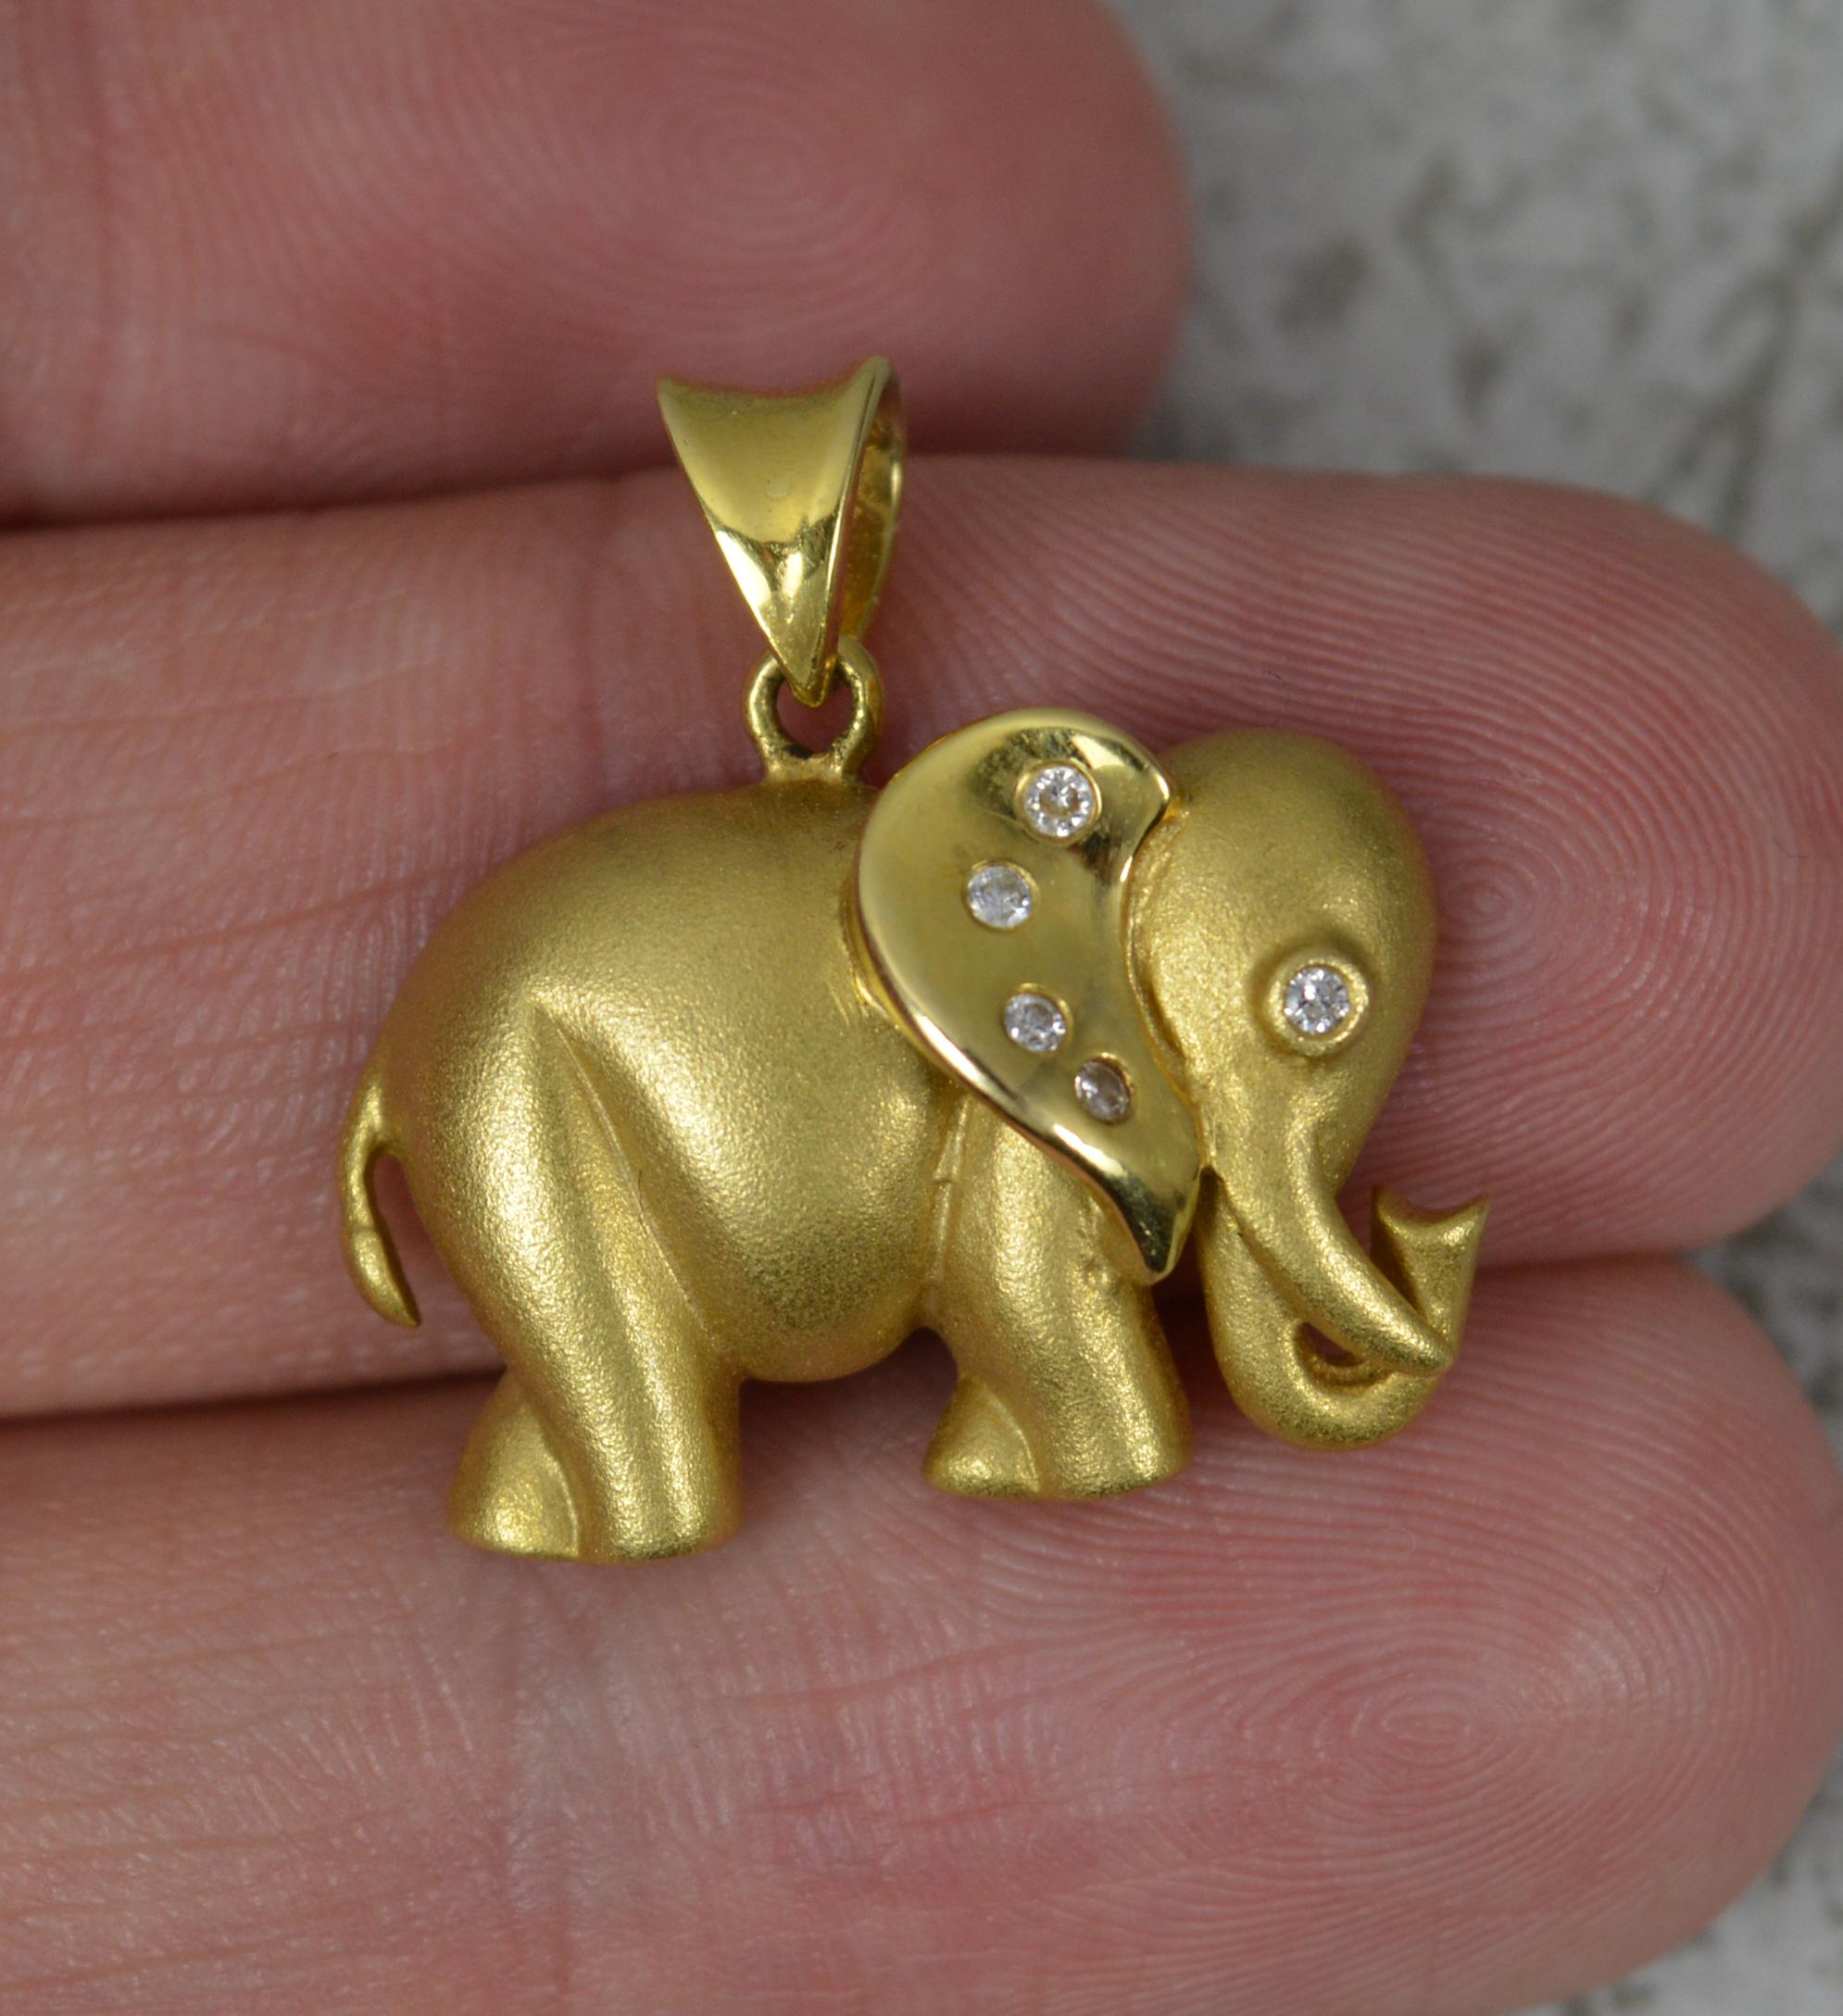 A fine quality pendant in the form of an elephant head.
Well made example with two tone finish to body.
Set with a natural round cut diamond to each eye and a further four to the ear.

CONDITION ; Very good. Crisp design. Well set diamonds. Issue